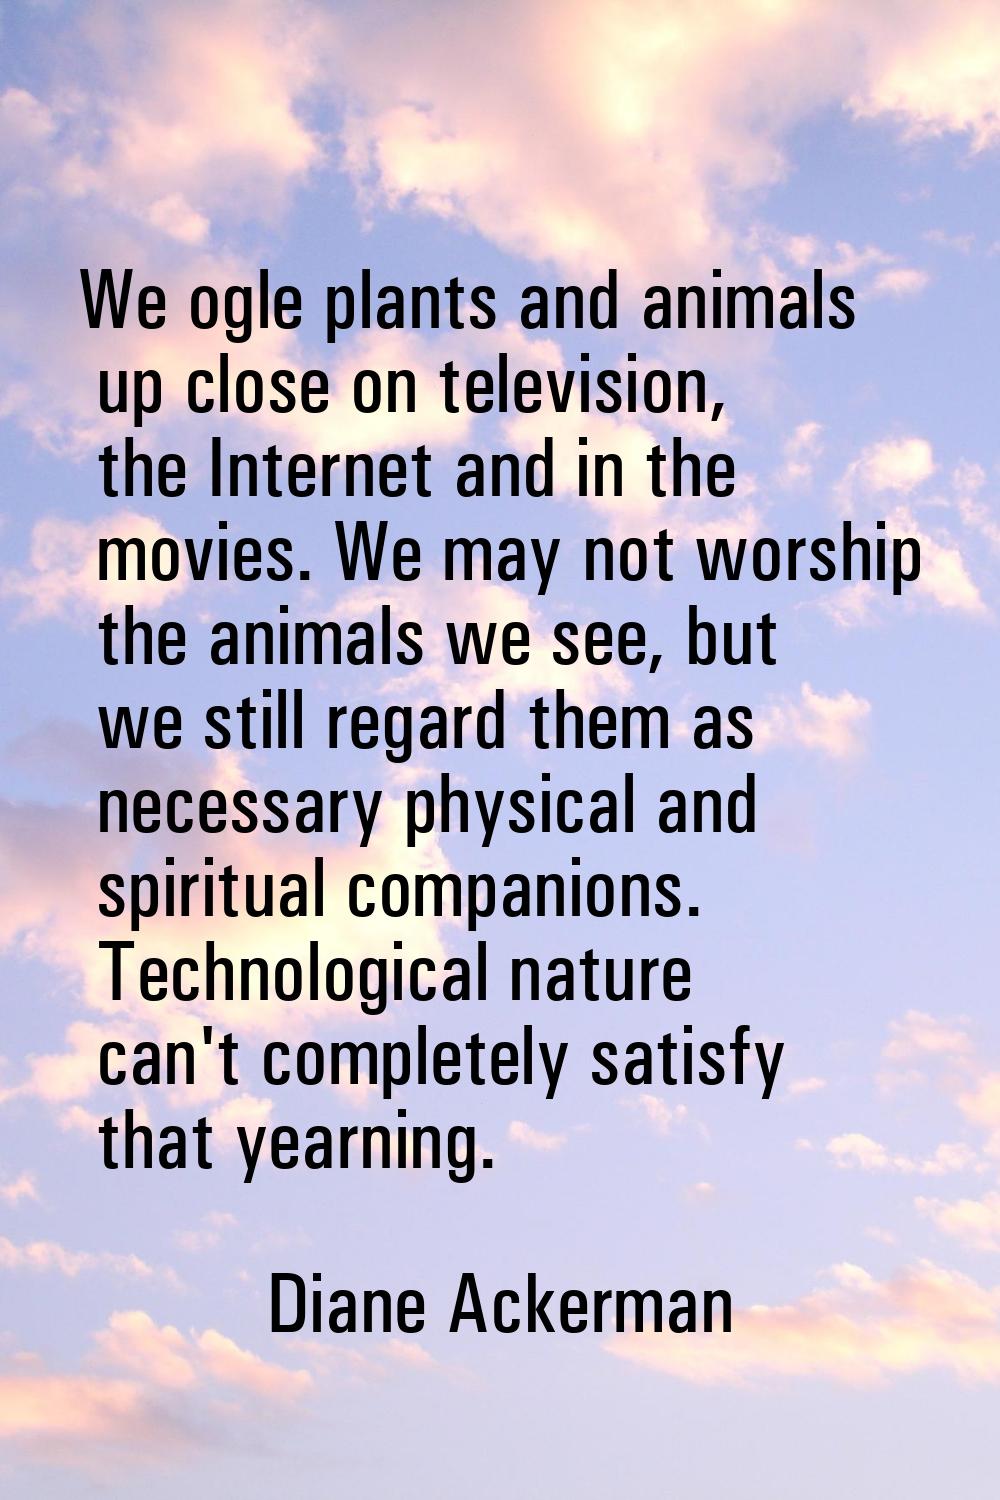 We ogle plants and animals up close on television, the Internet and in the movies. We may not worsh